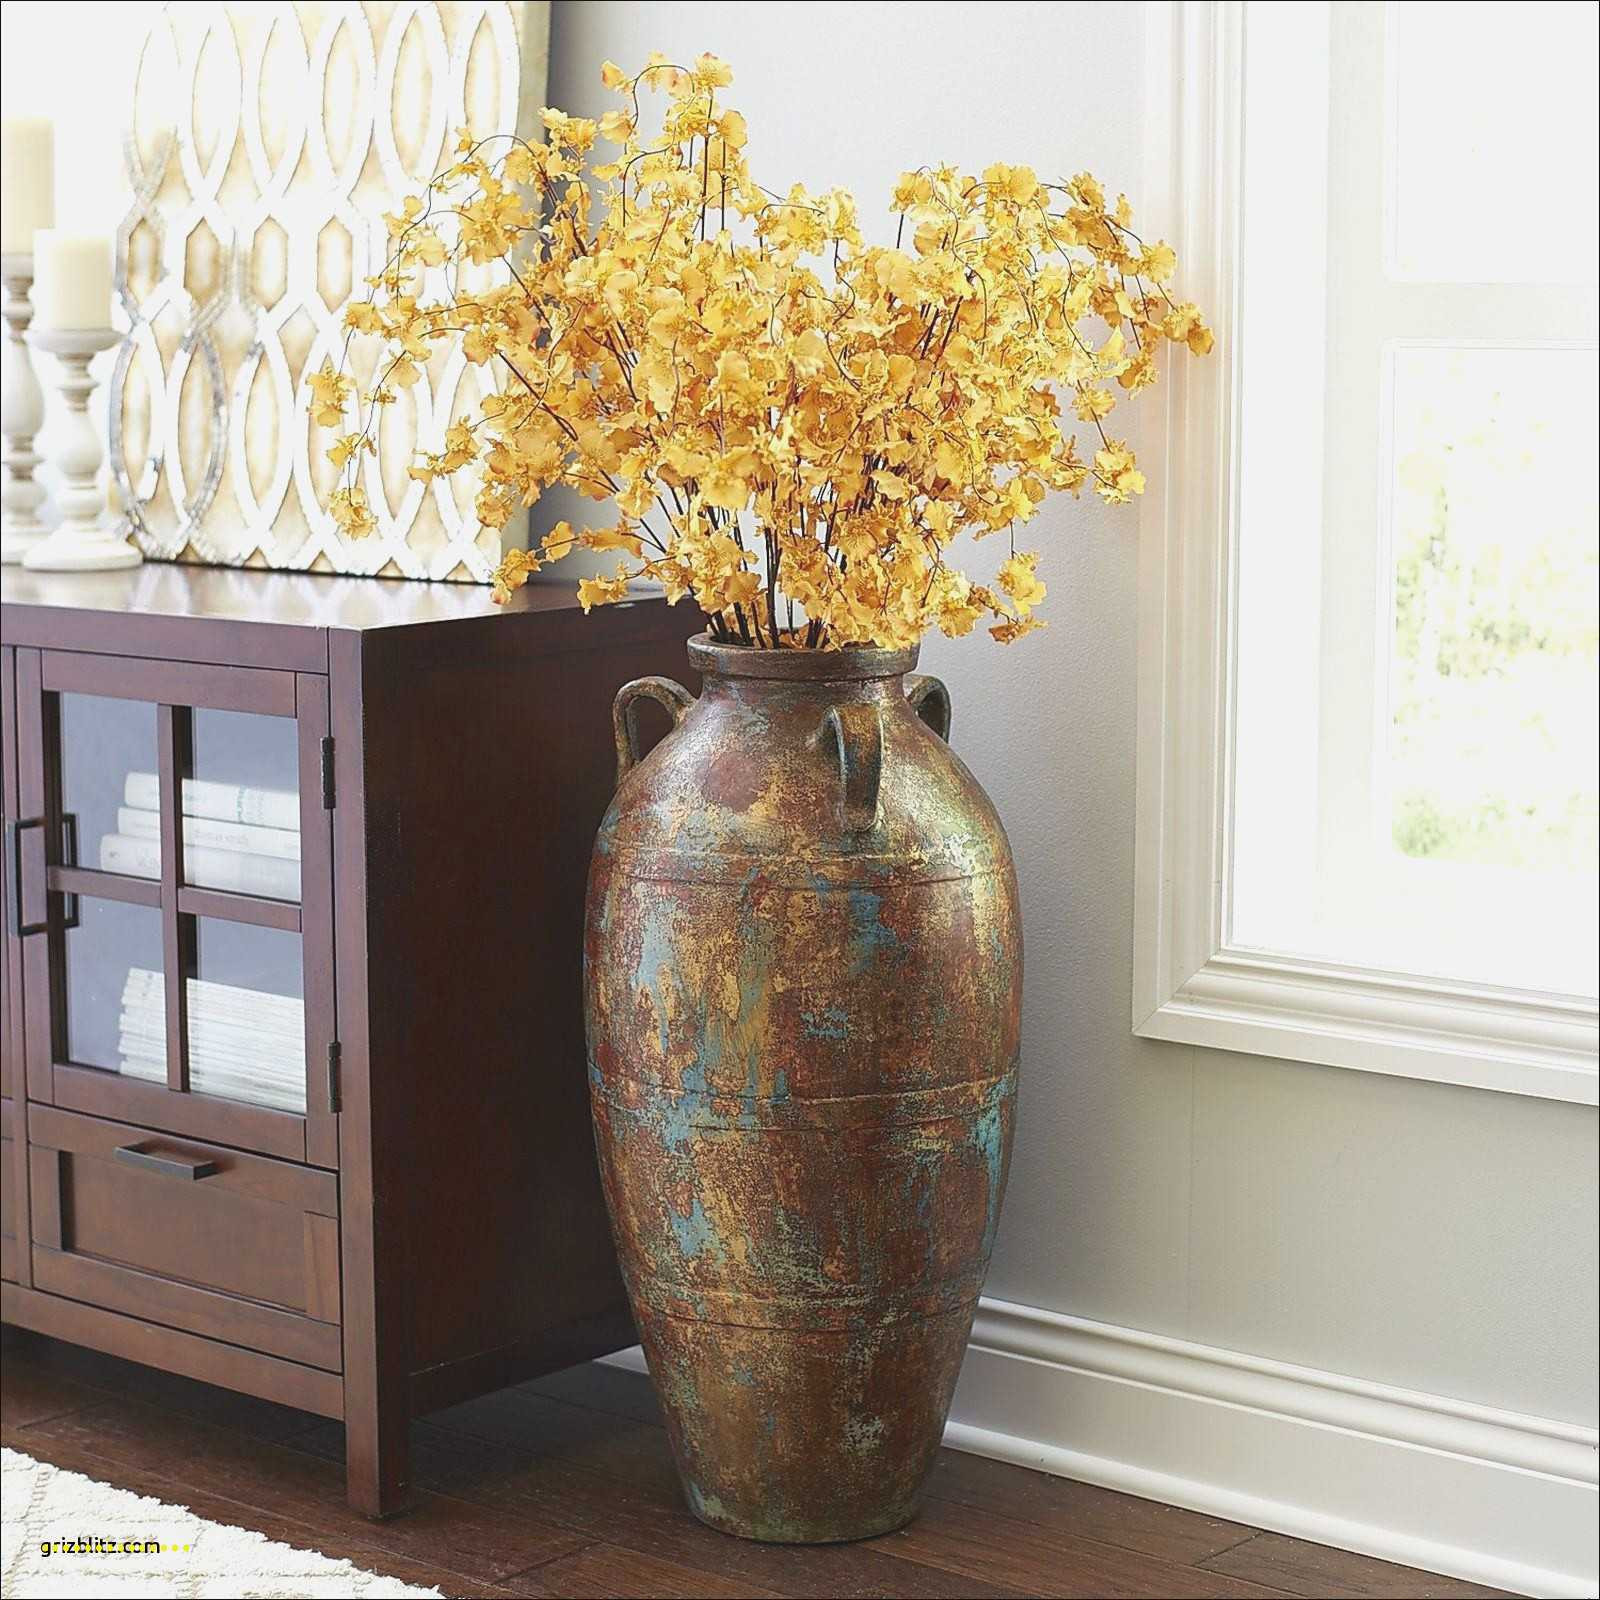 27 Fashionable Floor Vase Fillers 2024 free download floor vase fillers of tall floor vase fillers photograph 24 elegant decorating ideas for in tall floor vase fillers photograph lovely floor vase filler of tall floor vase fillers photograph 